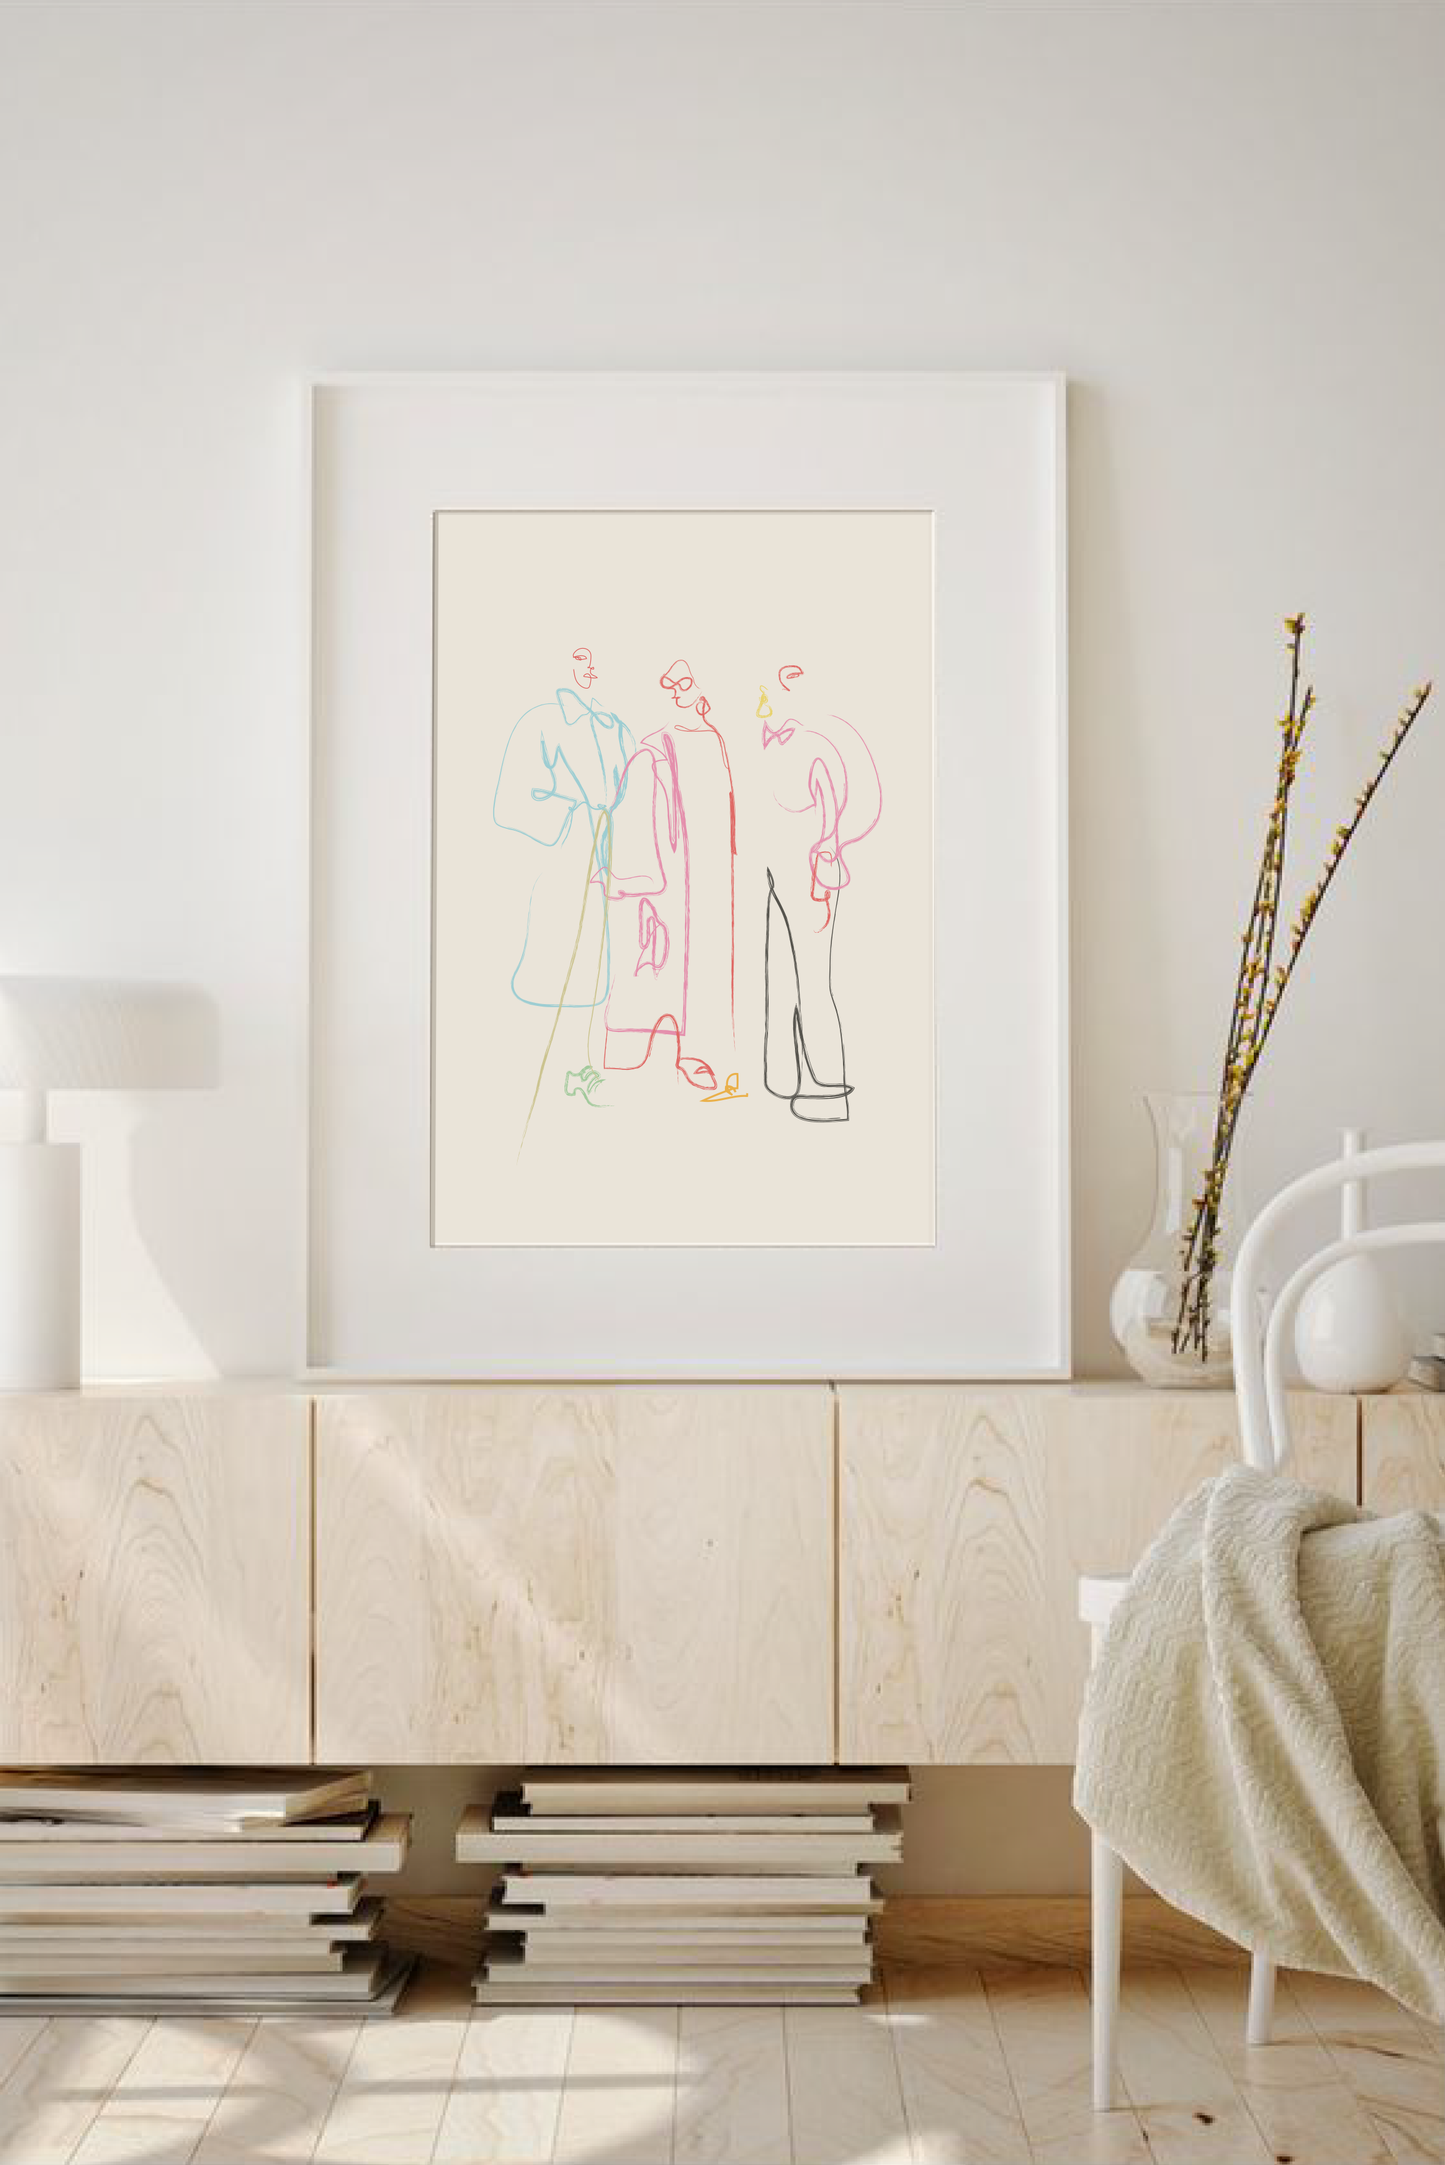 Abstract minimalist multicolour line artwork pictured on the wall